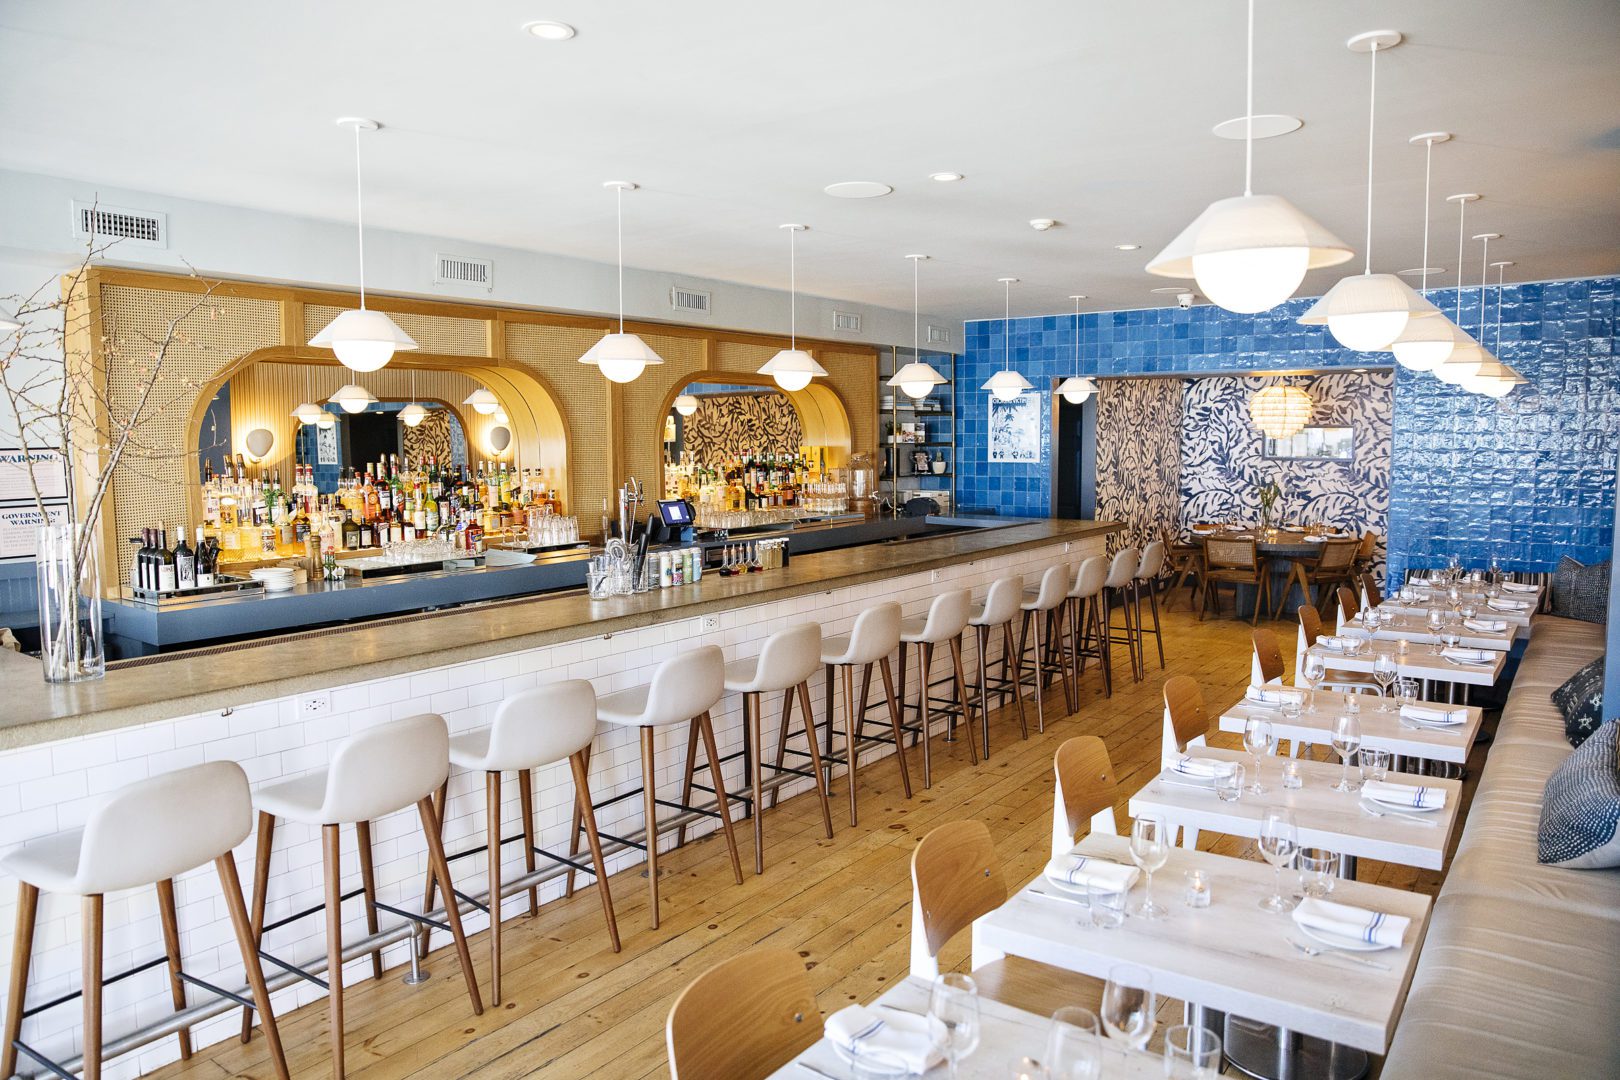 Rosie's Restaurant | Blue, white, and beige Interior Design, Large Bar Counter and A Dining Area to the Right.